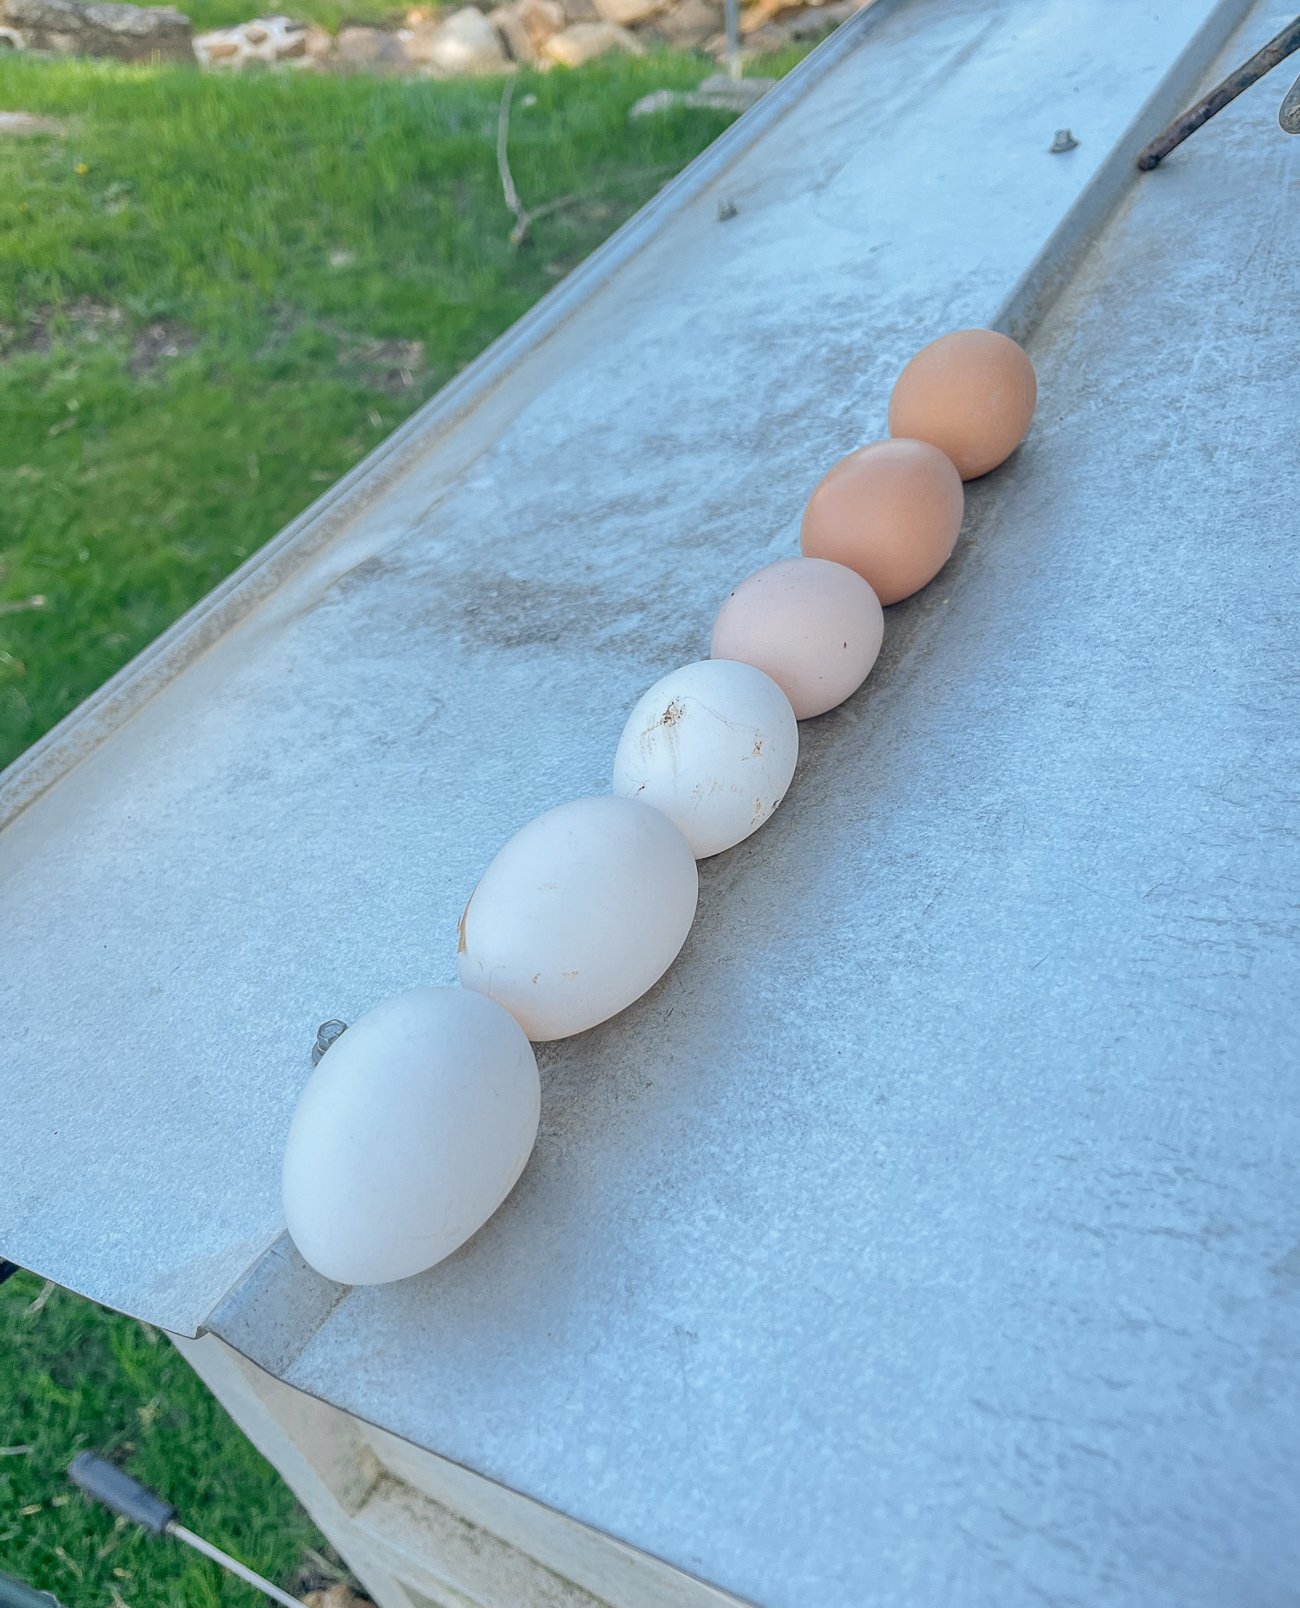 eggs collected from chickens